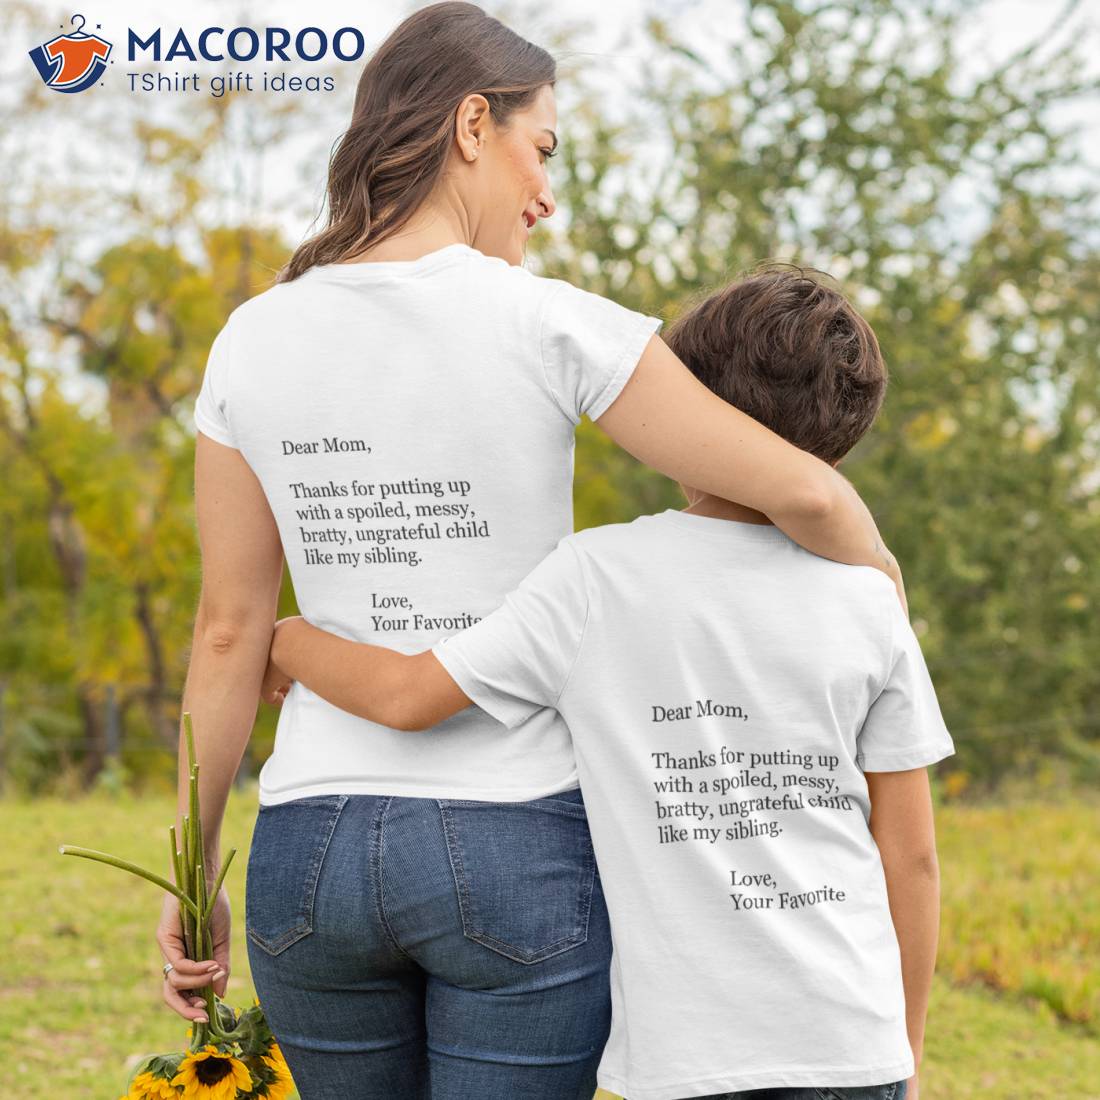 https://images.macoroo.com/wp-content/uploads/2023/05/mothers-day-ideas-and-funny-mom-christmas-cards-gifts-for-christmas-birthday-t-shirt-tshirt-2.jpg